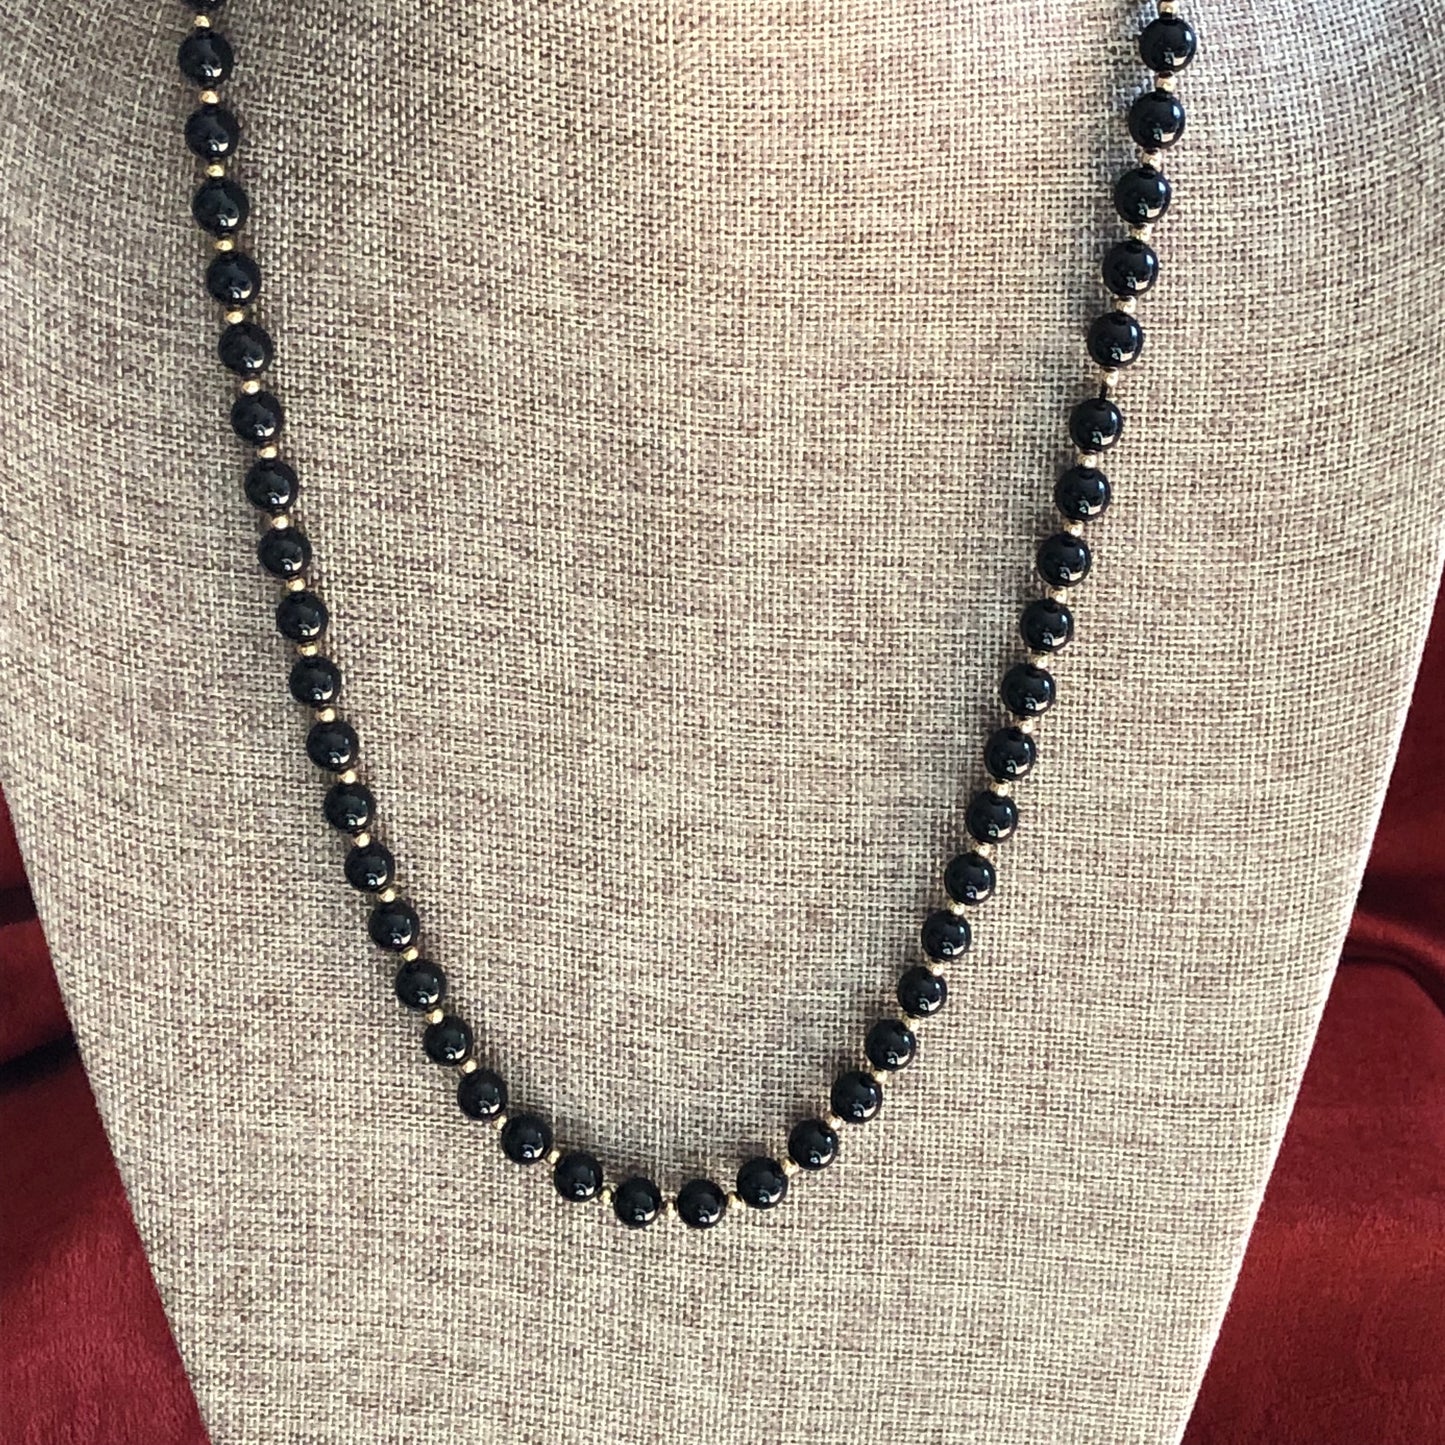 14k Yellow Gold and Black Onyx Bead Necklace